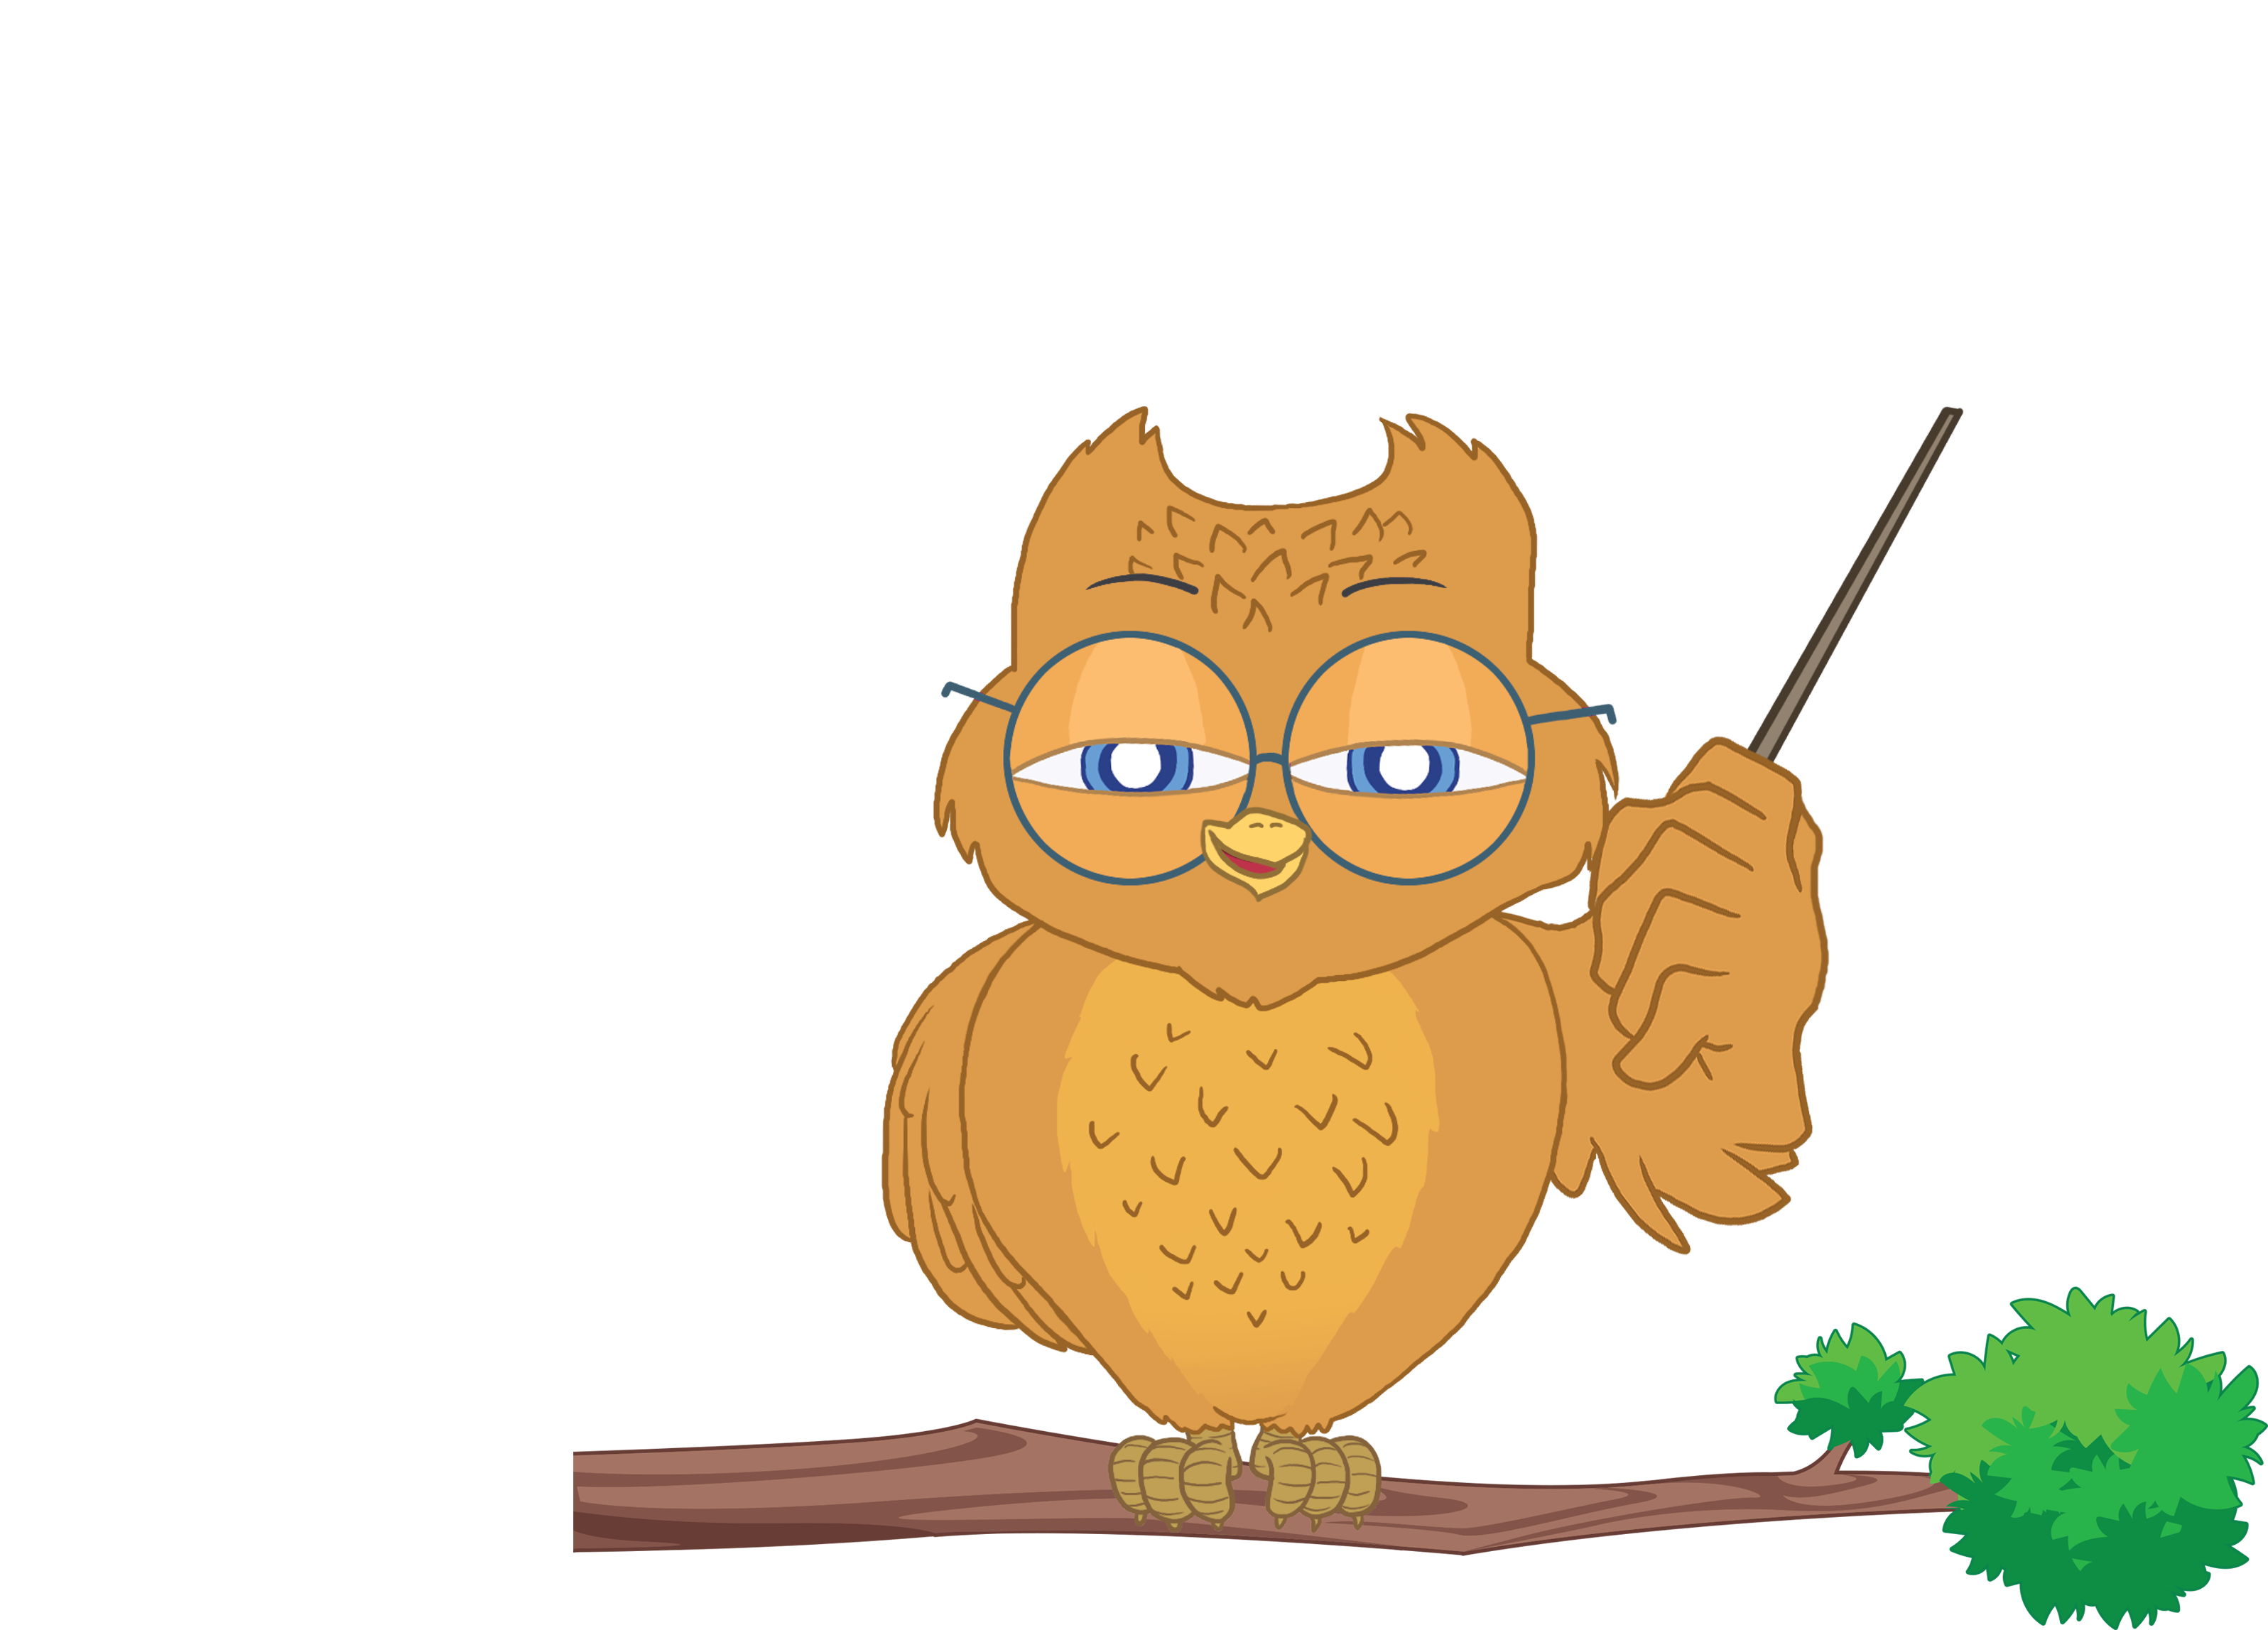 A digital illustration of an orange cartoon owl on a branch, wearing glasses, and holding a pointer.